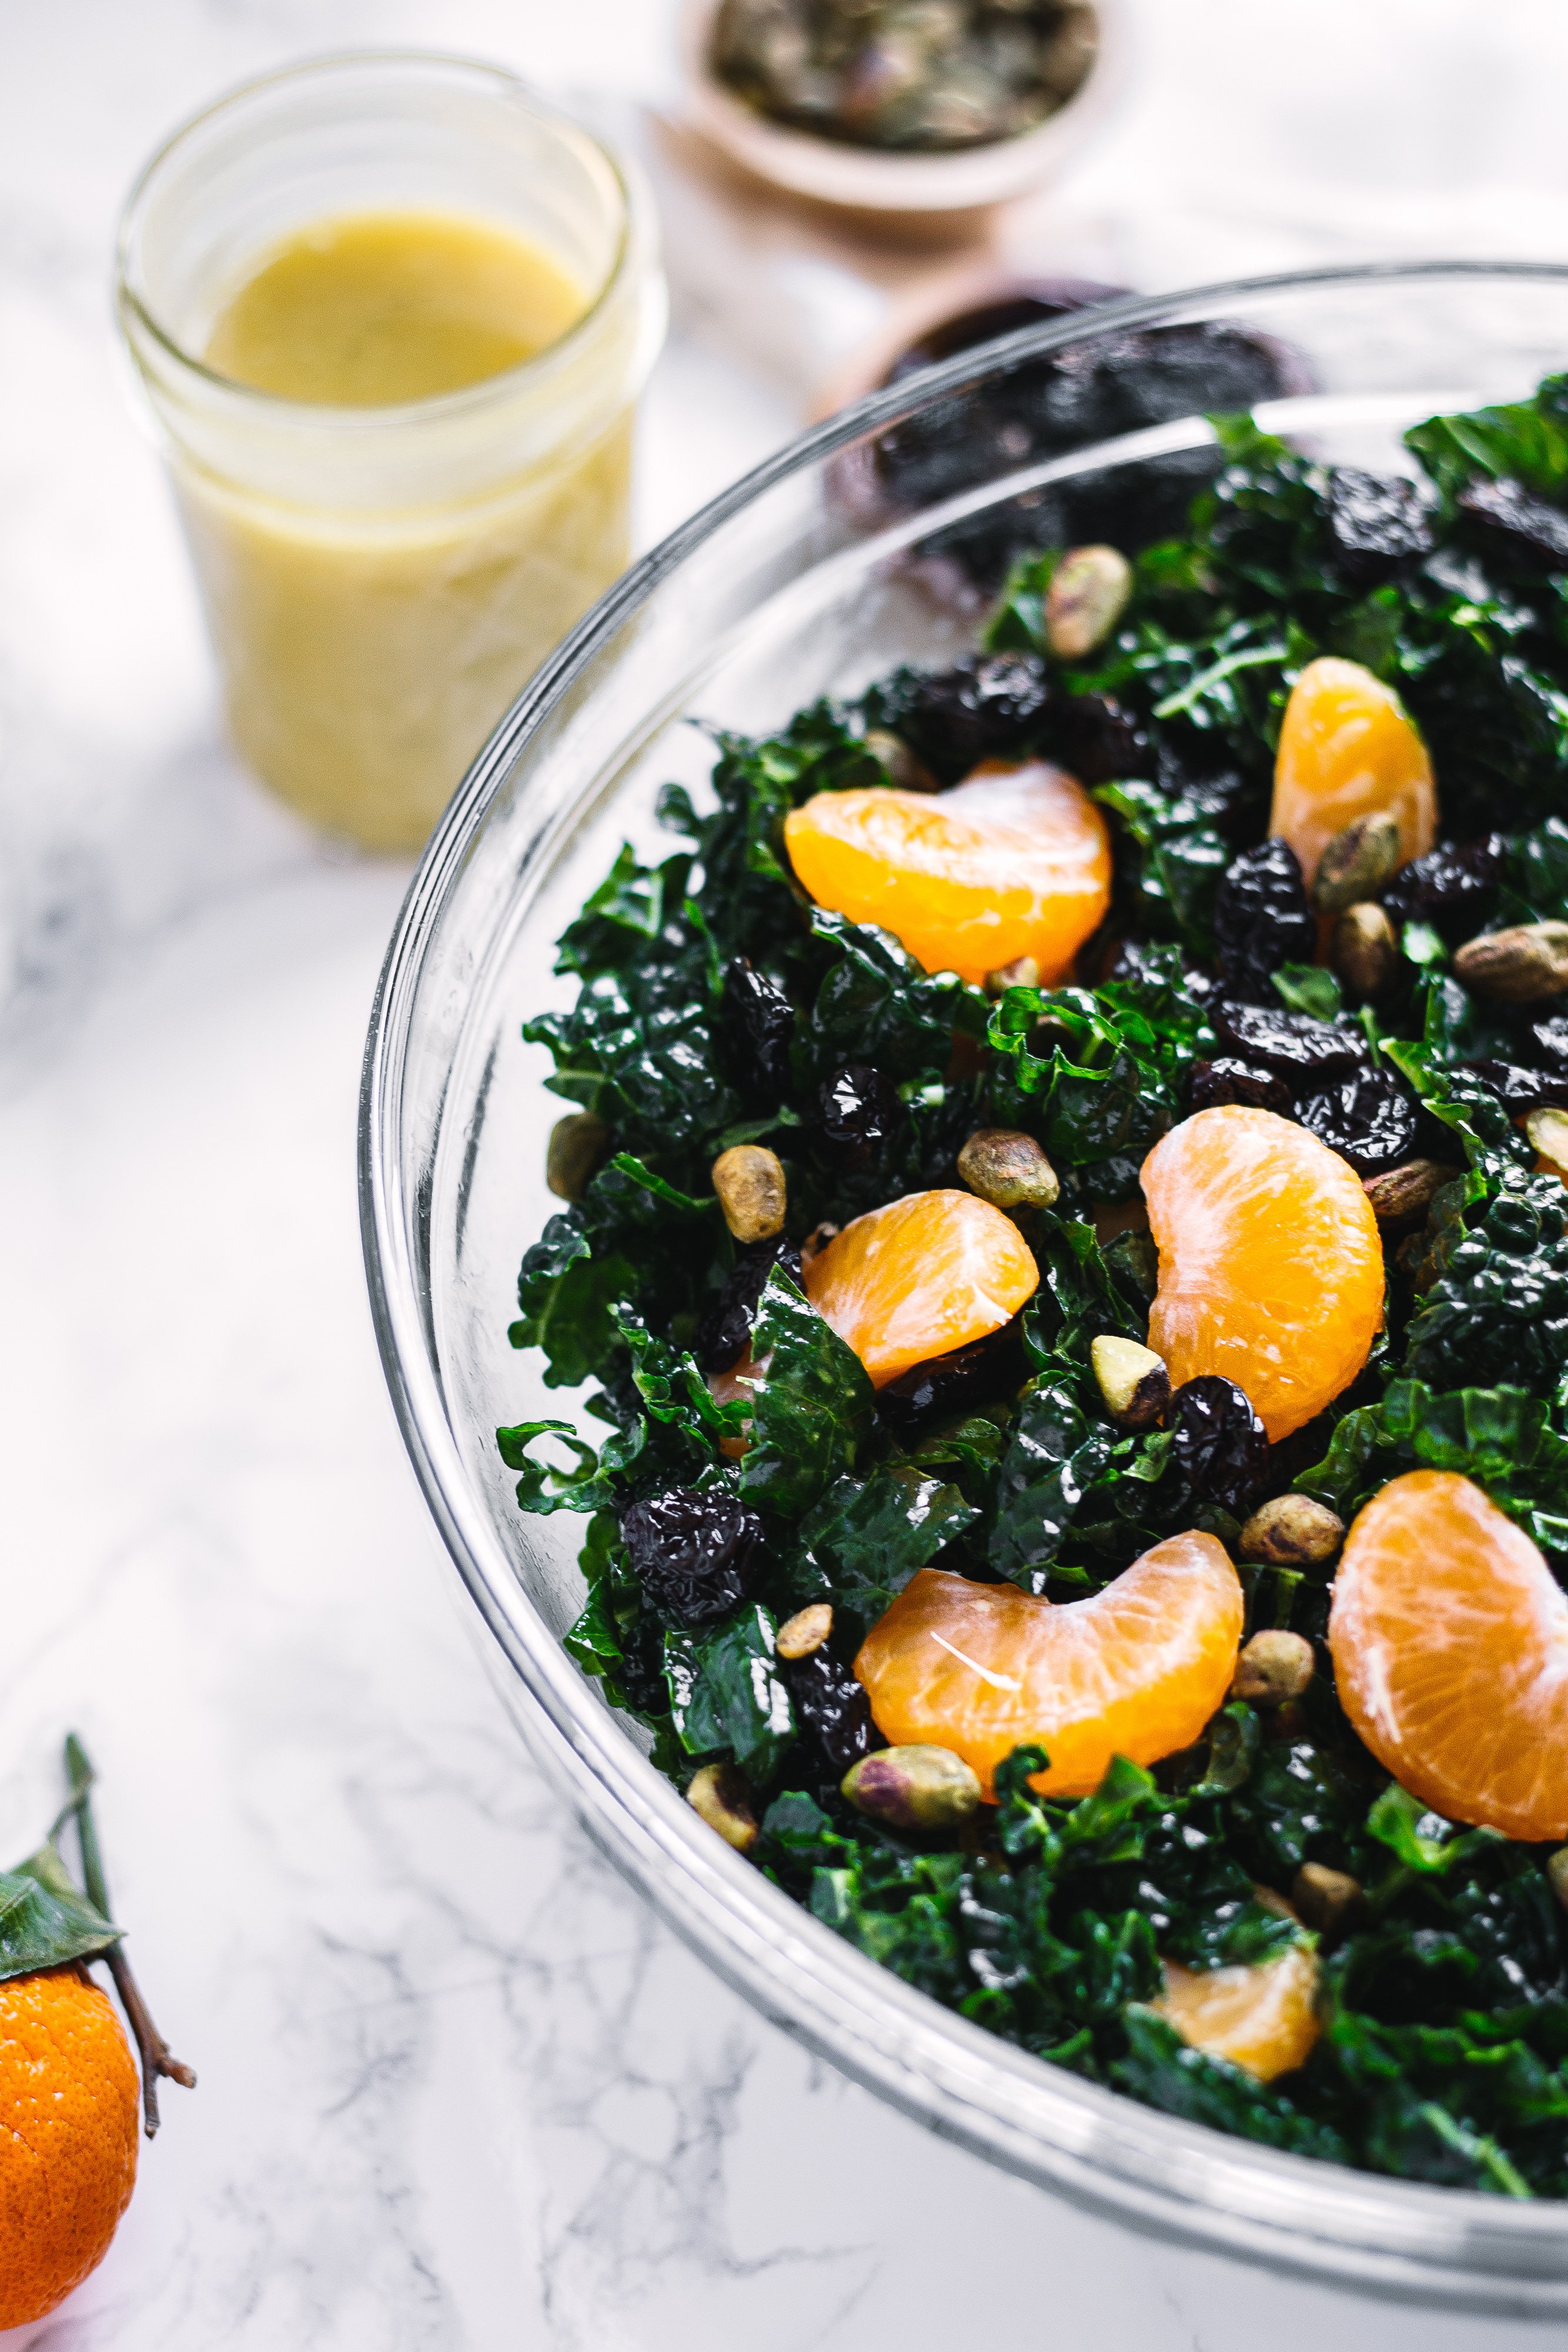 kale salad recipe - Food Types that are Good for the Gut